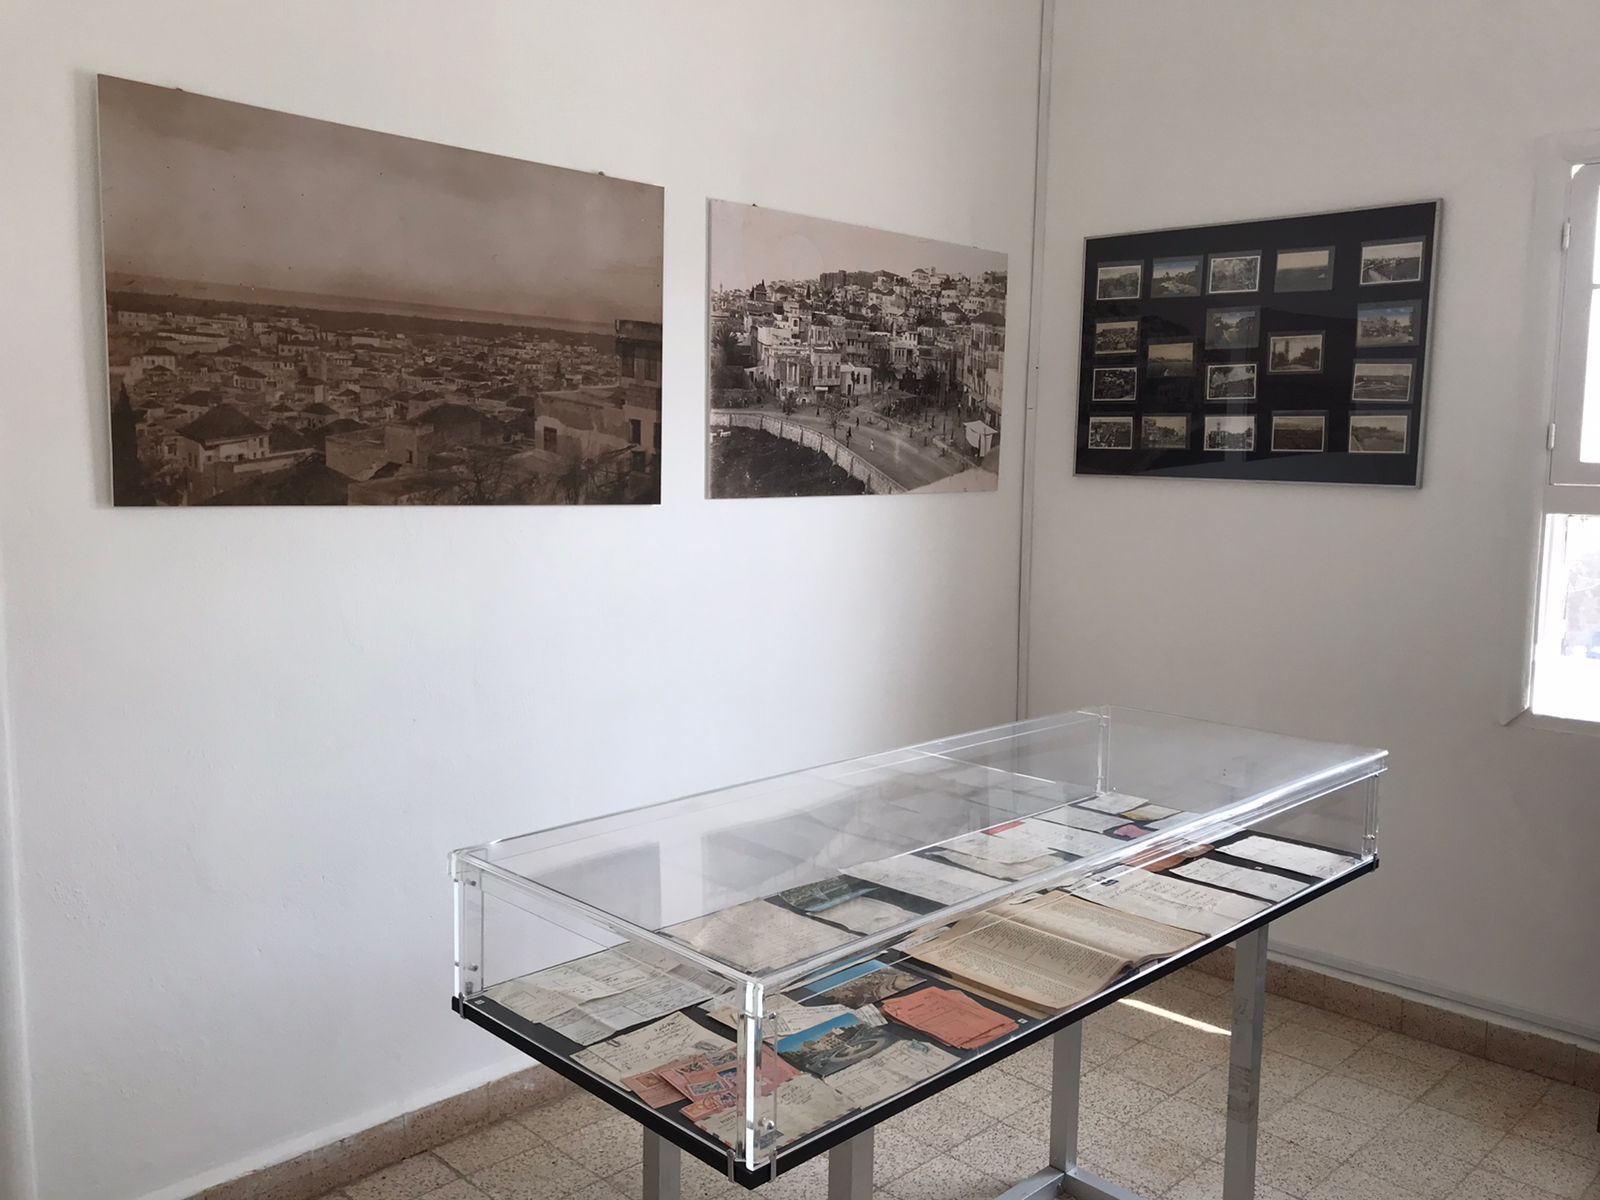 Snapshots of the Exhibition